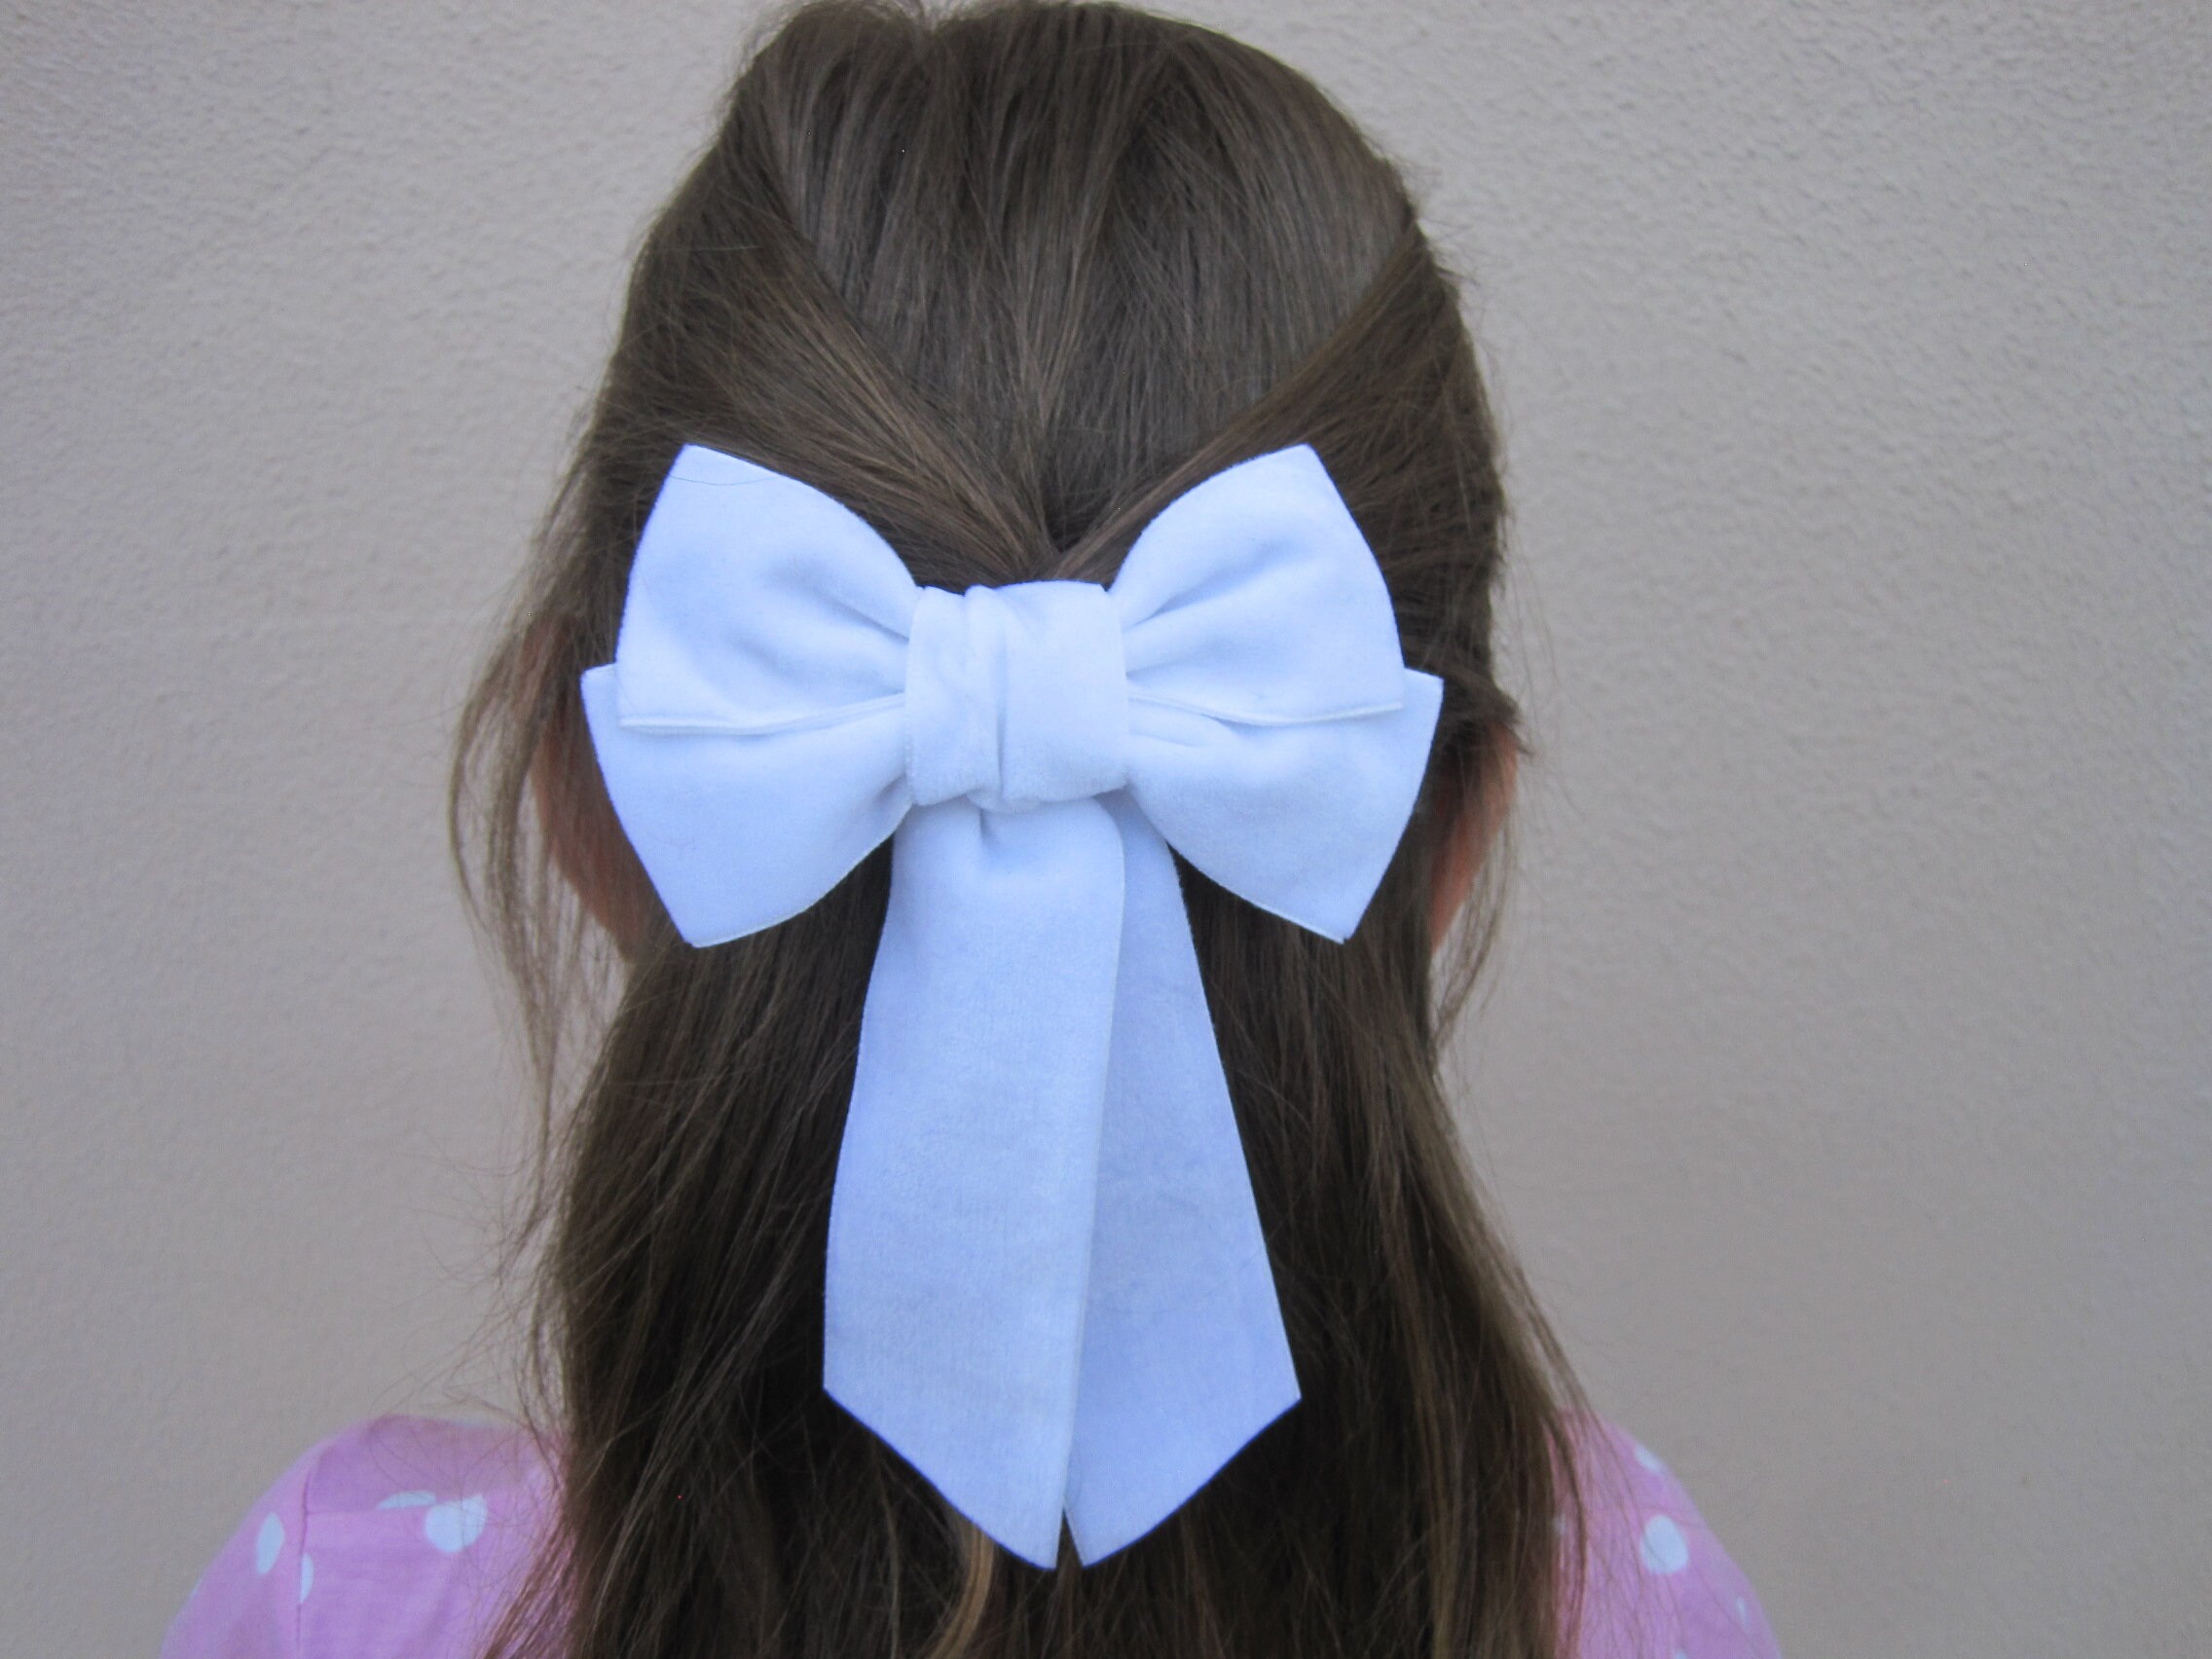 Large Blue Hair Bow - Oversized Satin Bow with Hair Tie - wide 6